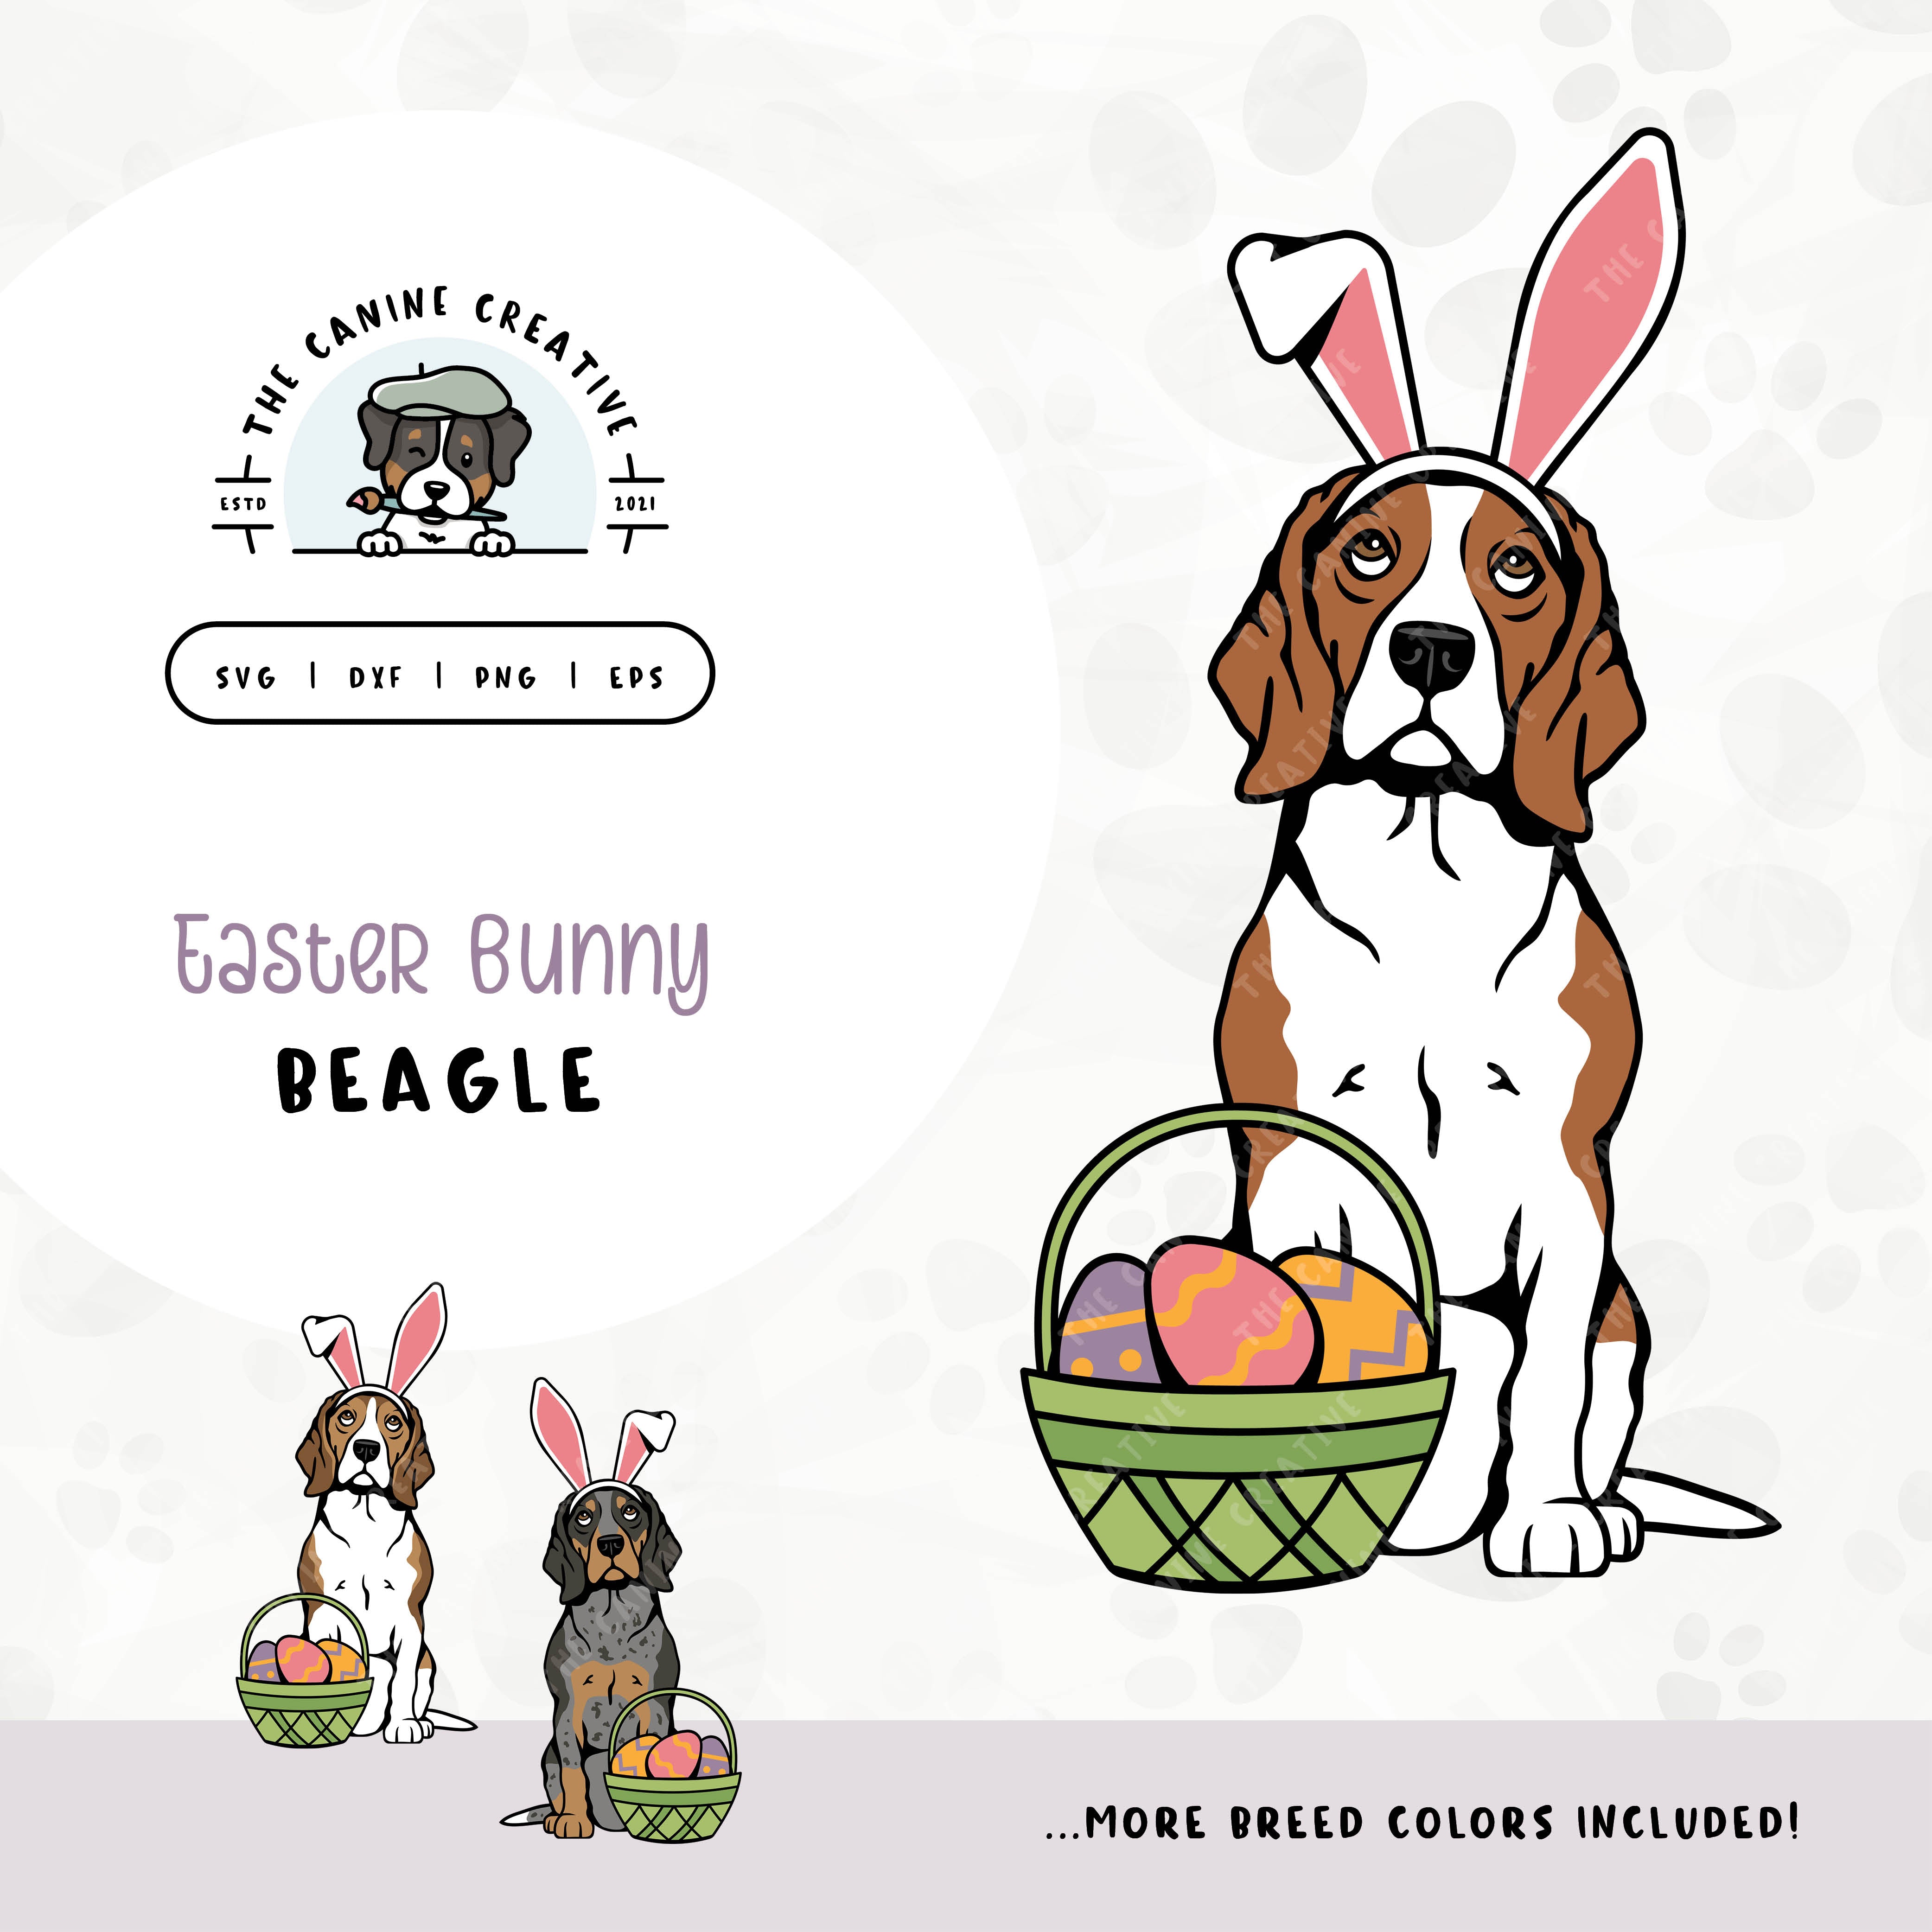 This springtime illustration features a Beagle adorned with festive bunny ears sitting next to a basket of brightly-colored Easter eggs. File formats include: SVG, DXF, PNG, and EPS.